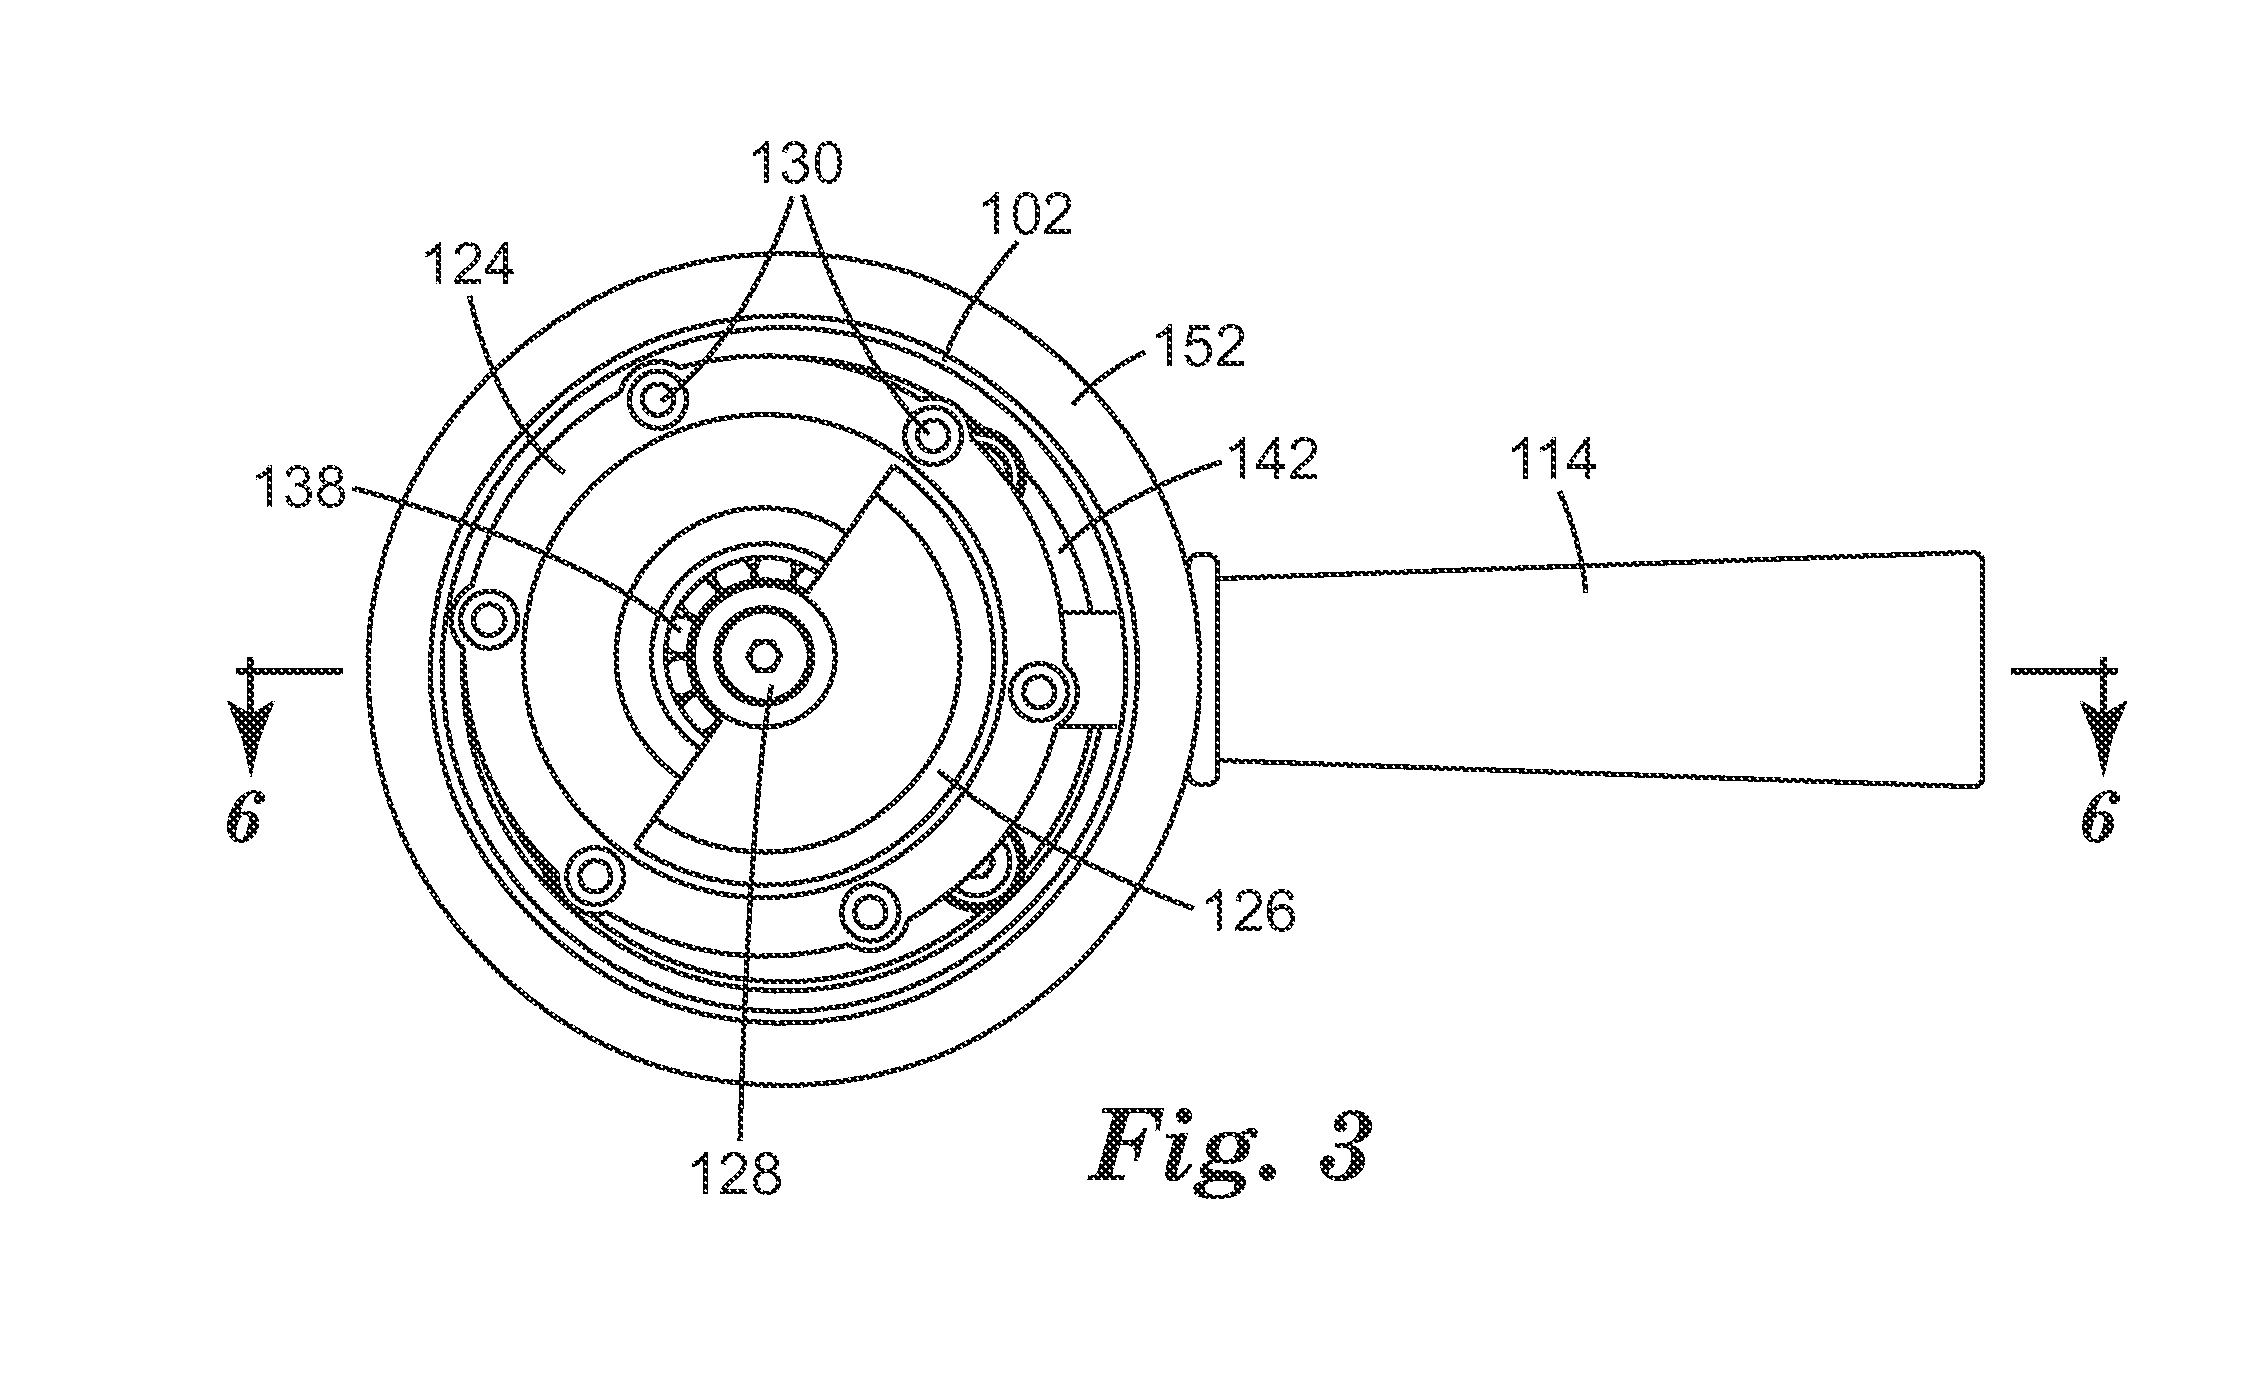 Modular dual-action devices and related methods